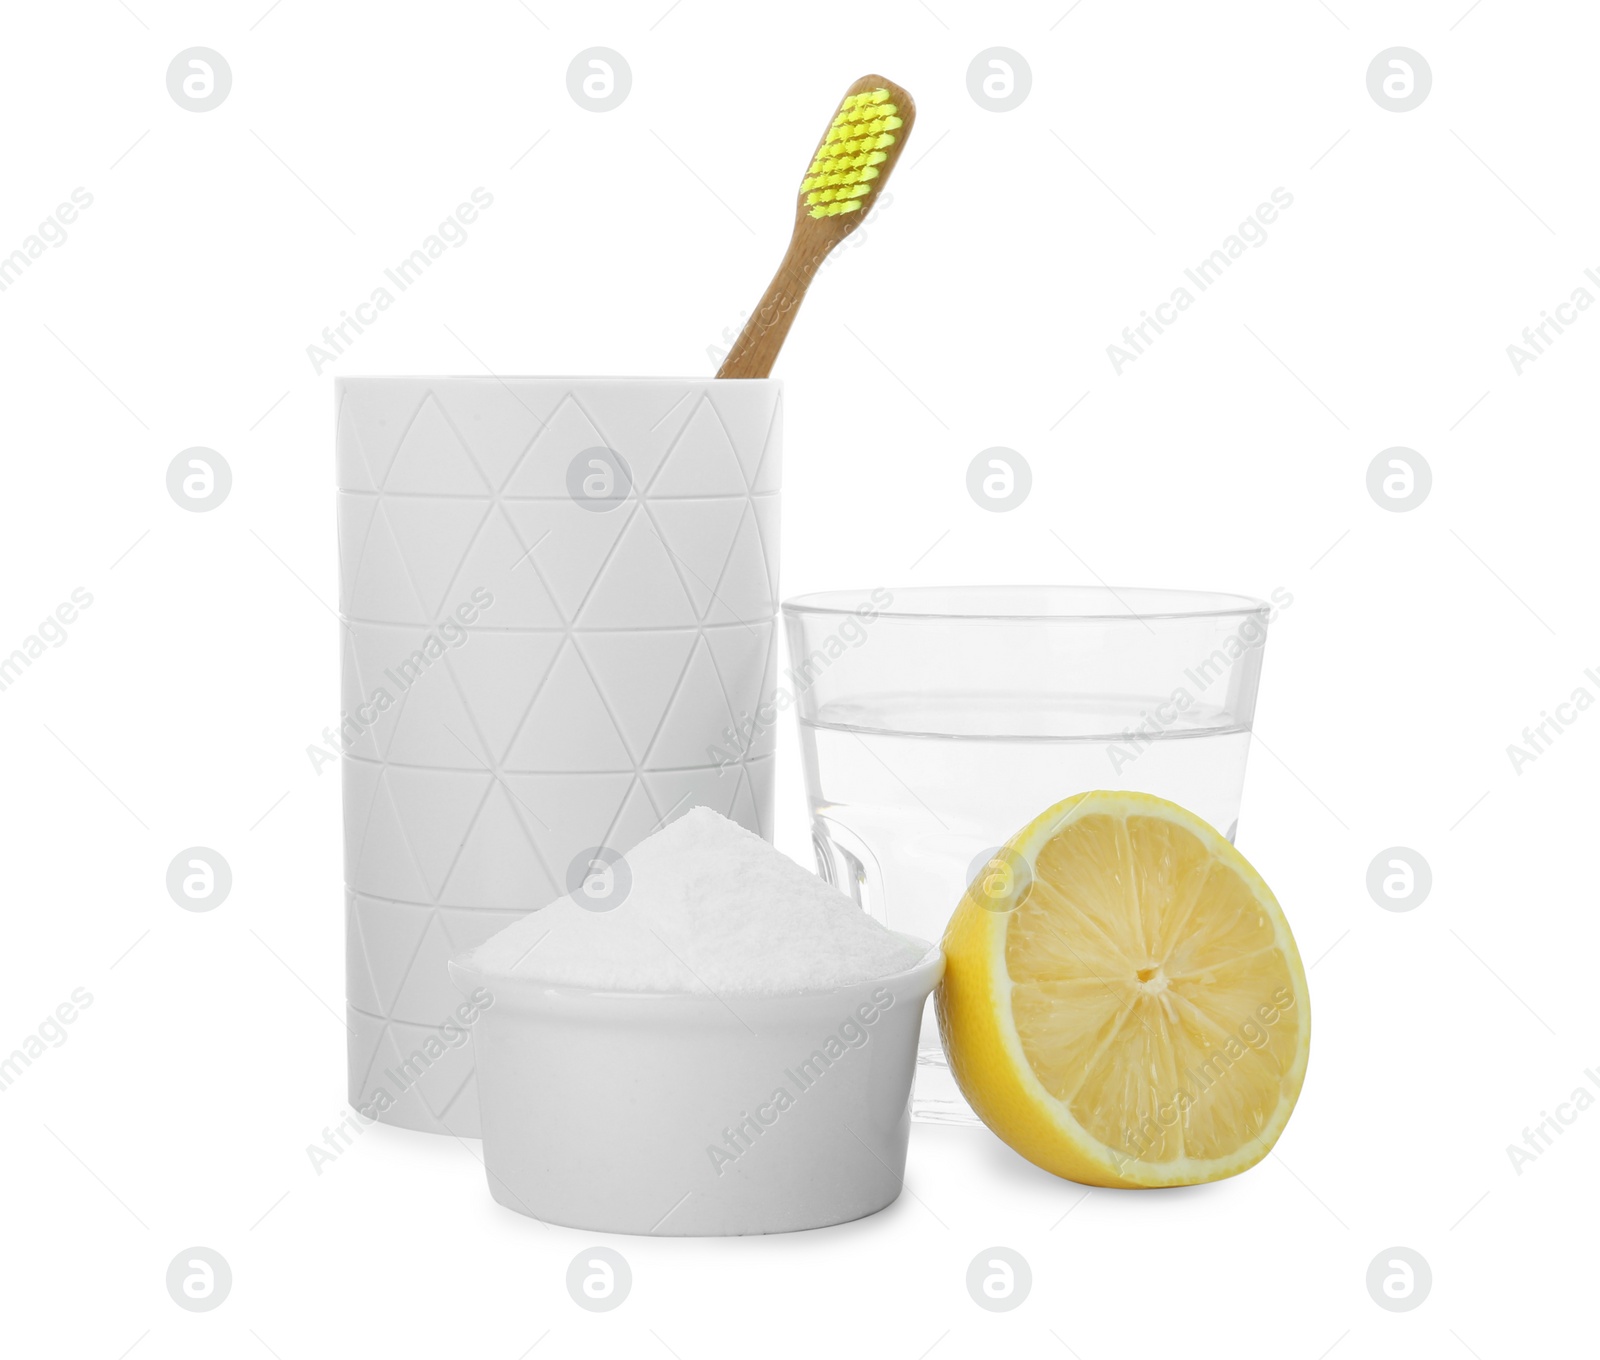 Photo of Bamboo toothbrush in holder, bowl with baking soda and fresh lemon on white background